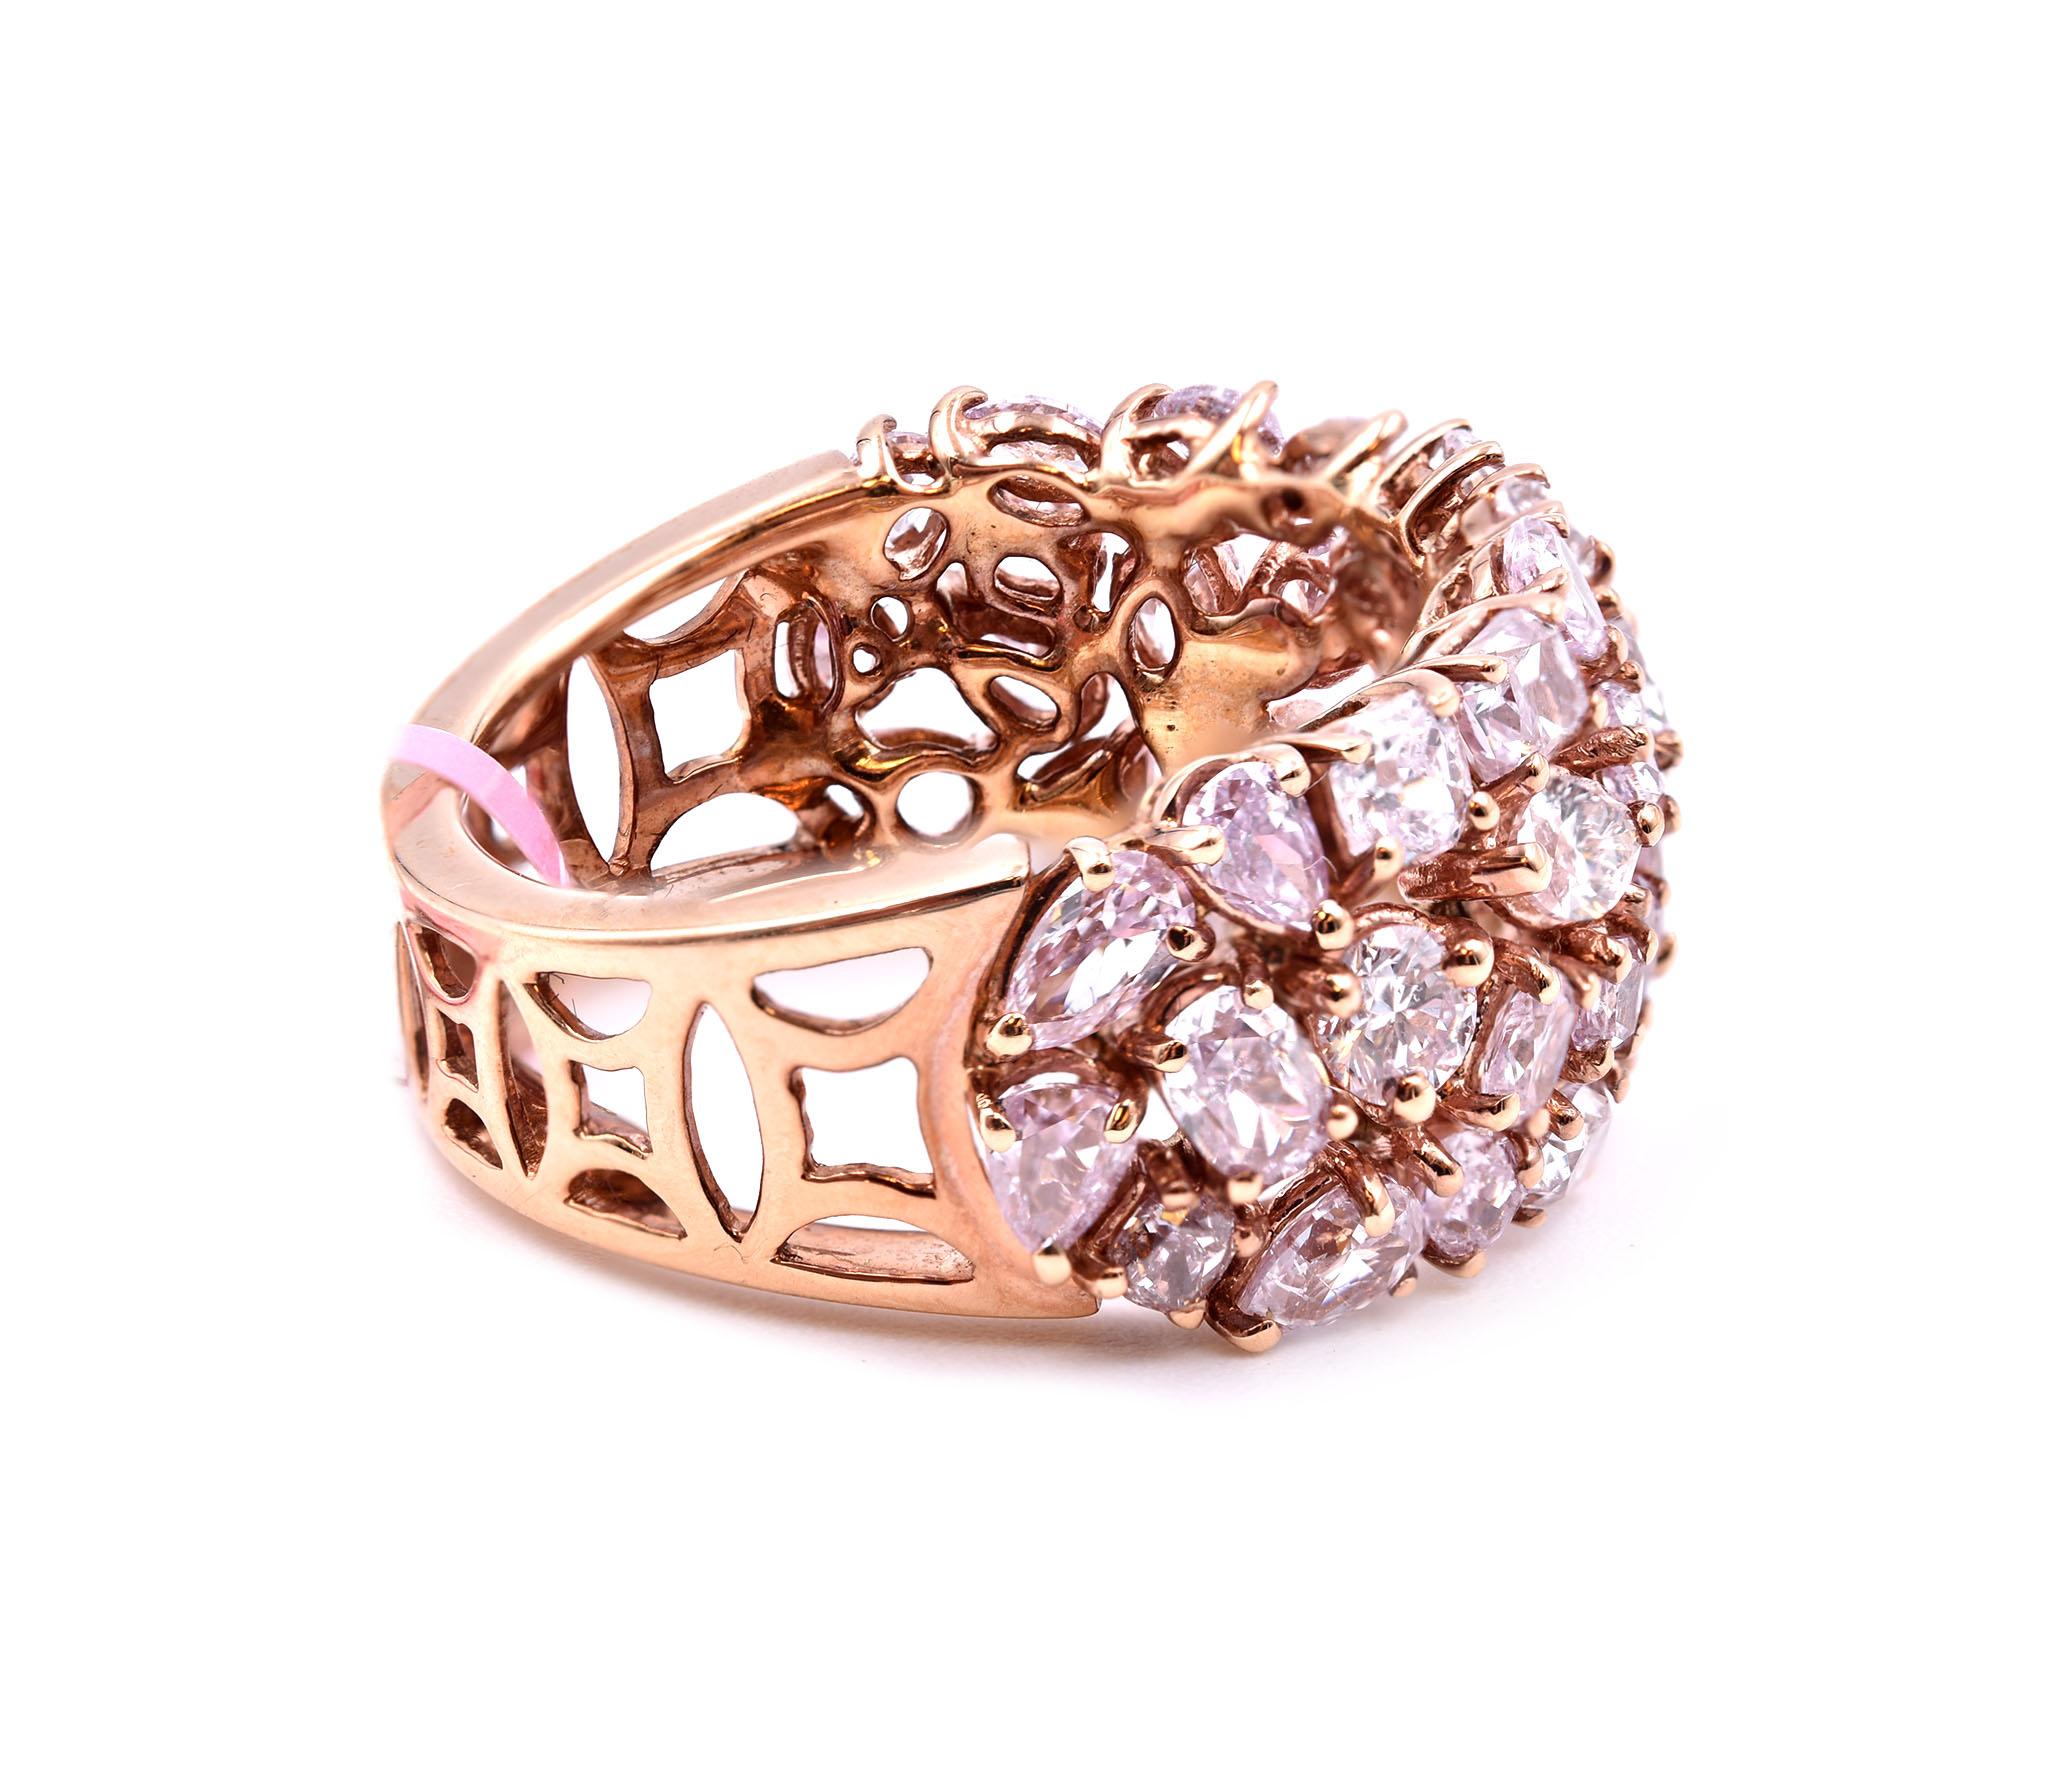 Designer: custom design
Material: 18k rose gold
Diamonds: 41 multi-shaped cuts= 3.49cttw
Color: pink
Ring Size: 6 ½ (please allow two additional shipping days for sizing requests)  
Dimensions: ring is 11.30mm wide
	
